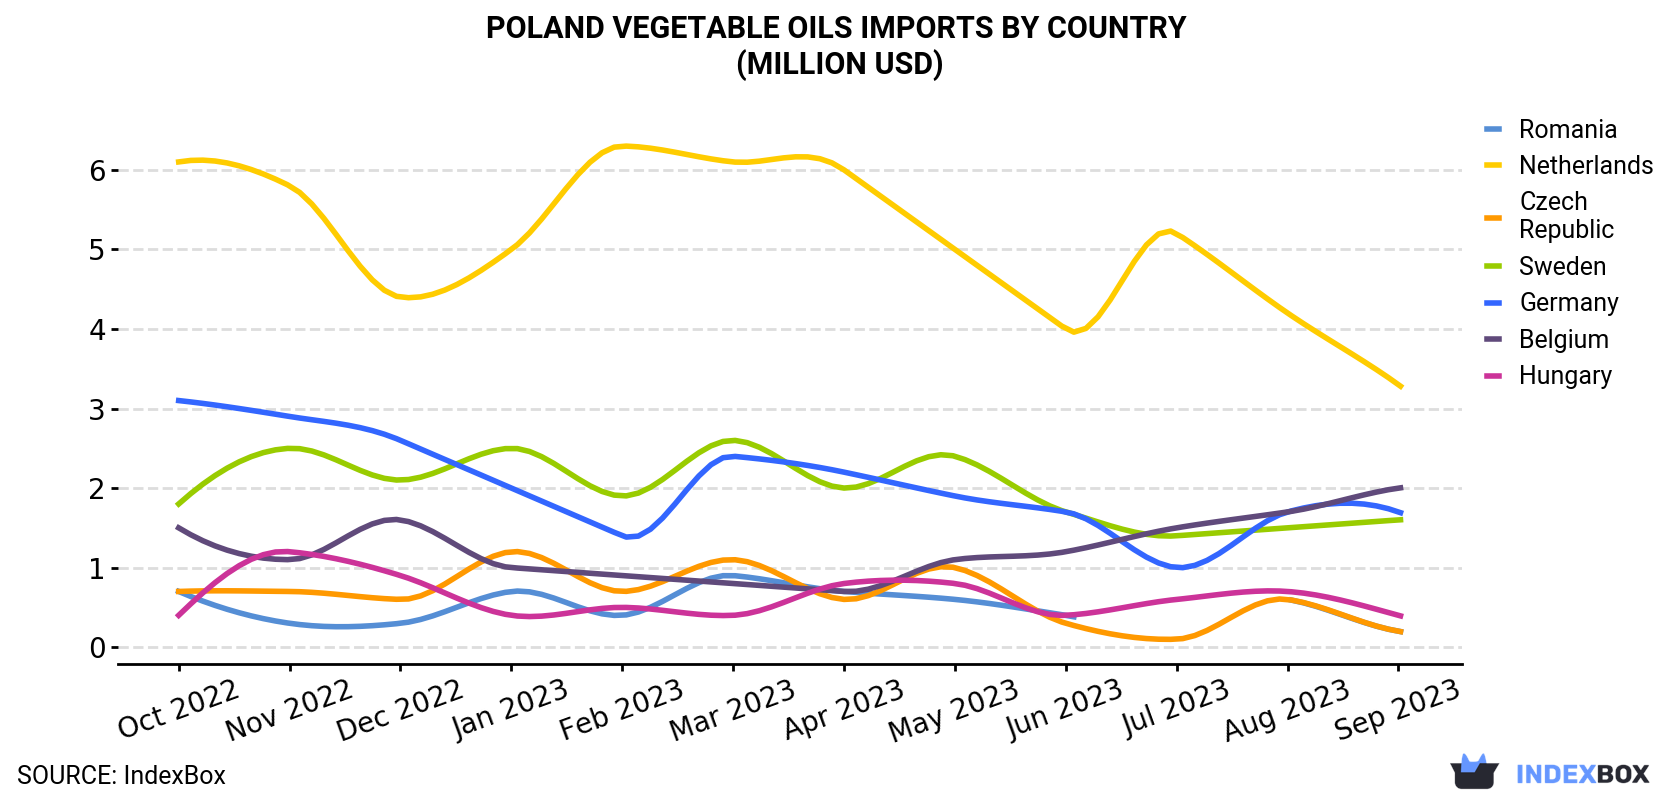 Poland Vegetable Oils Imports By Country (Million USD)